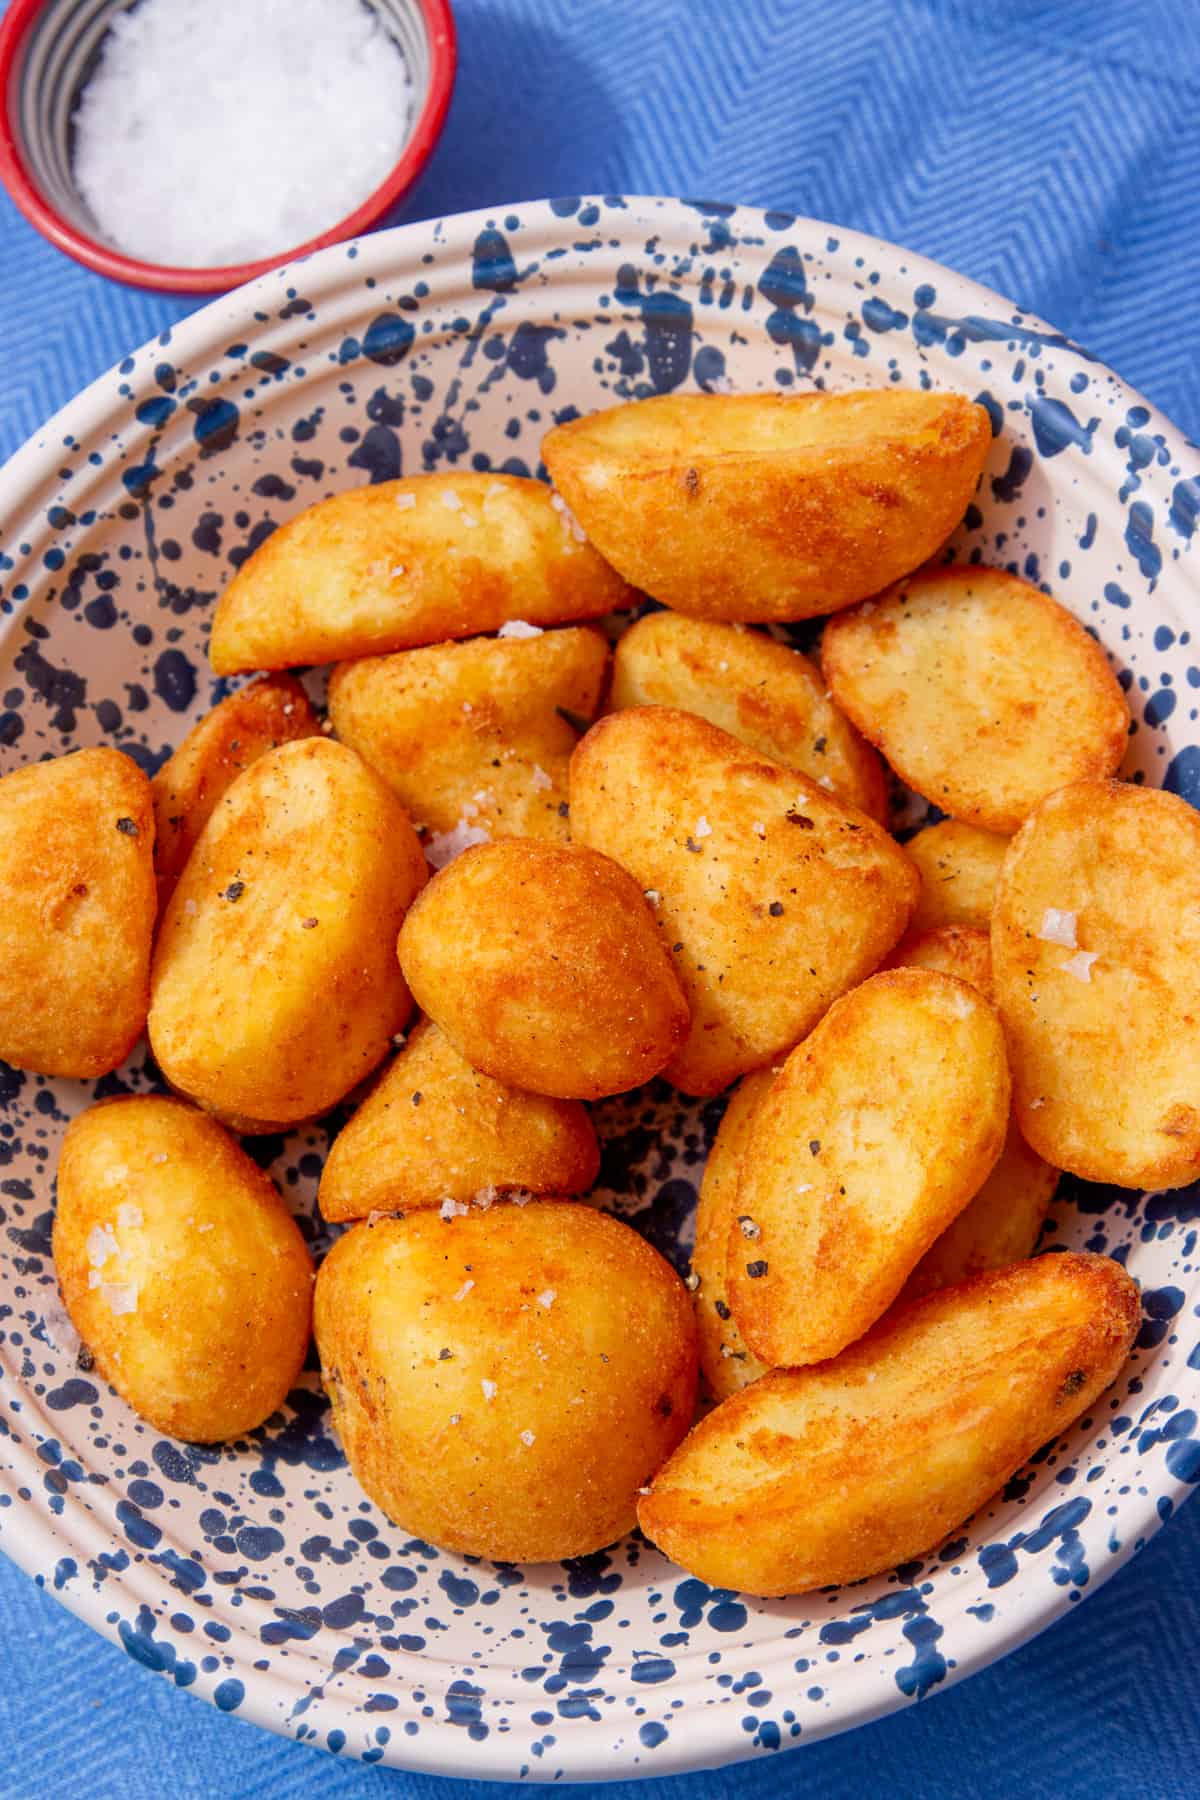 Golden browned roast potatoes in a patterned white and bowl with a small bowl of salt behind on a blue cloth.